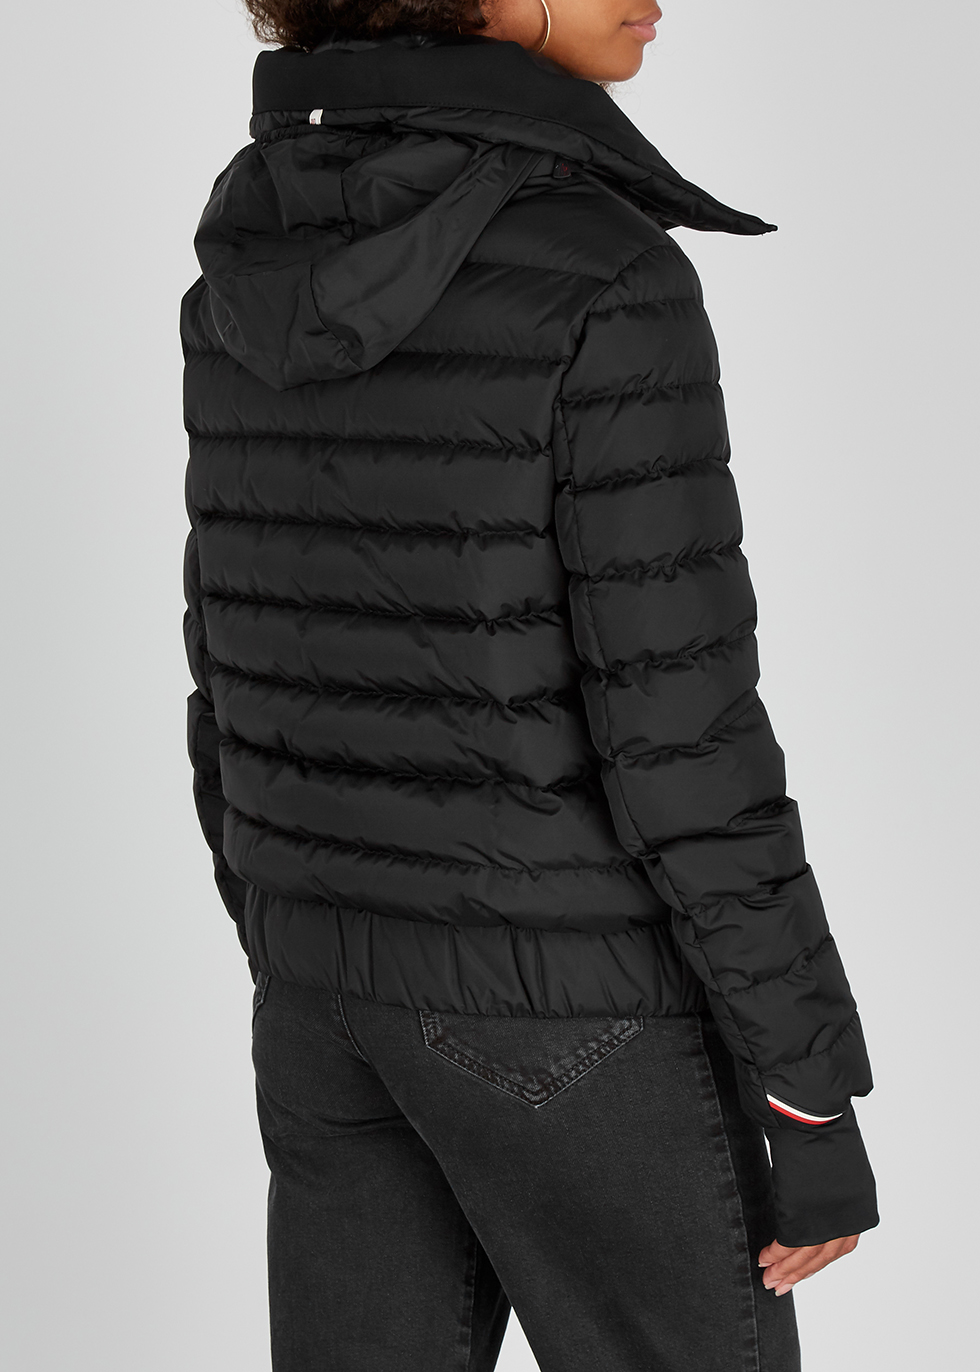 black quilted shell jacket - Harvey Nichols